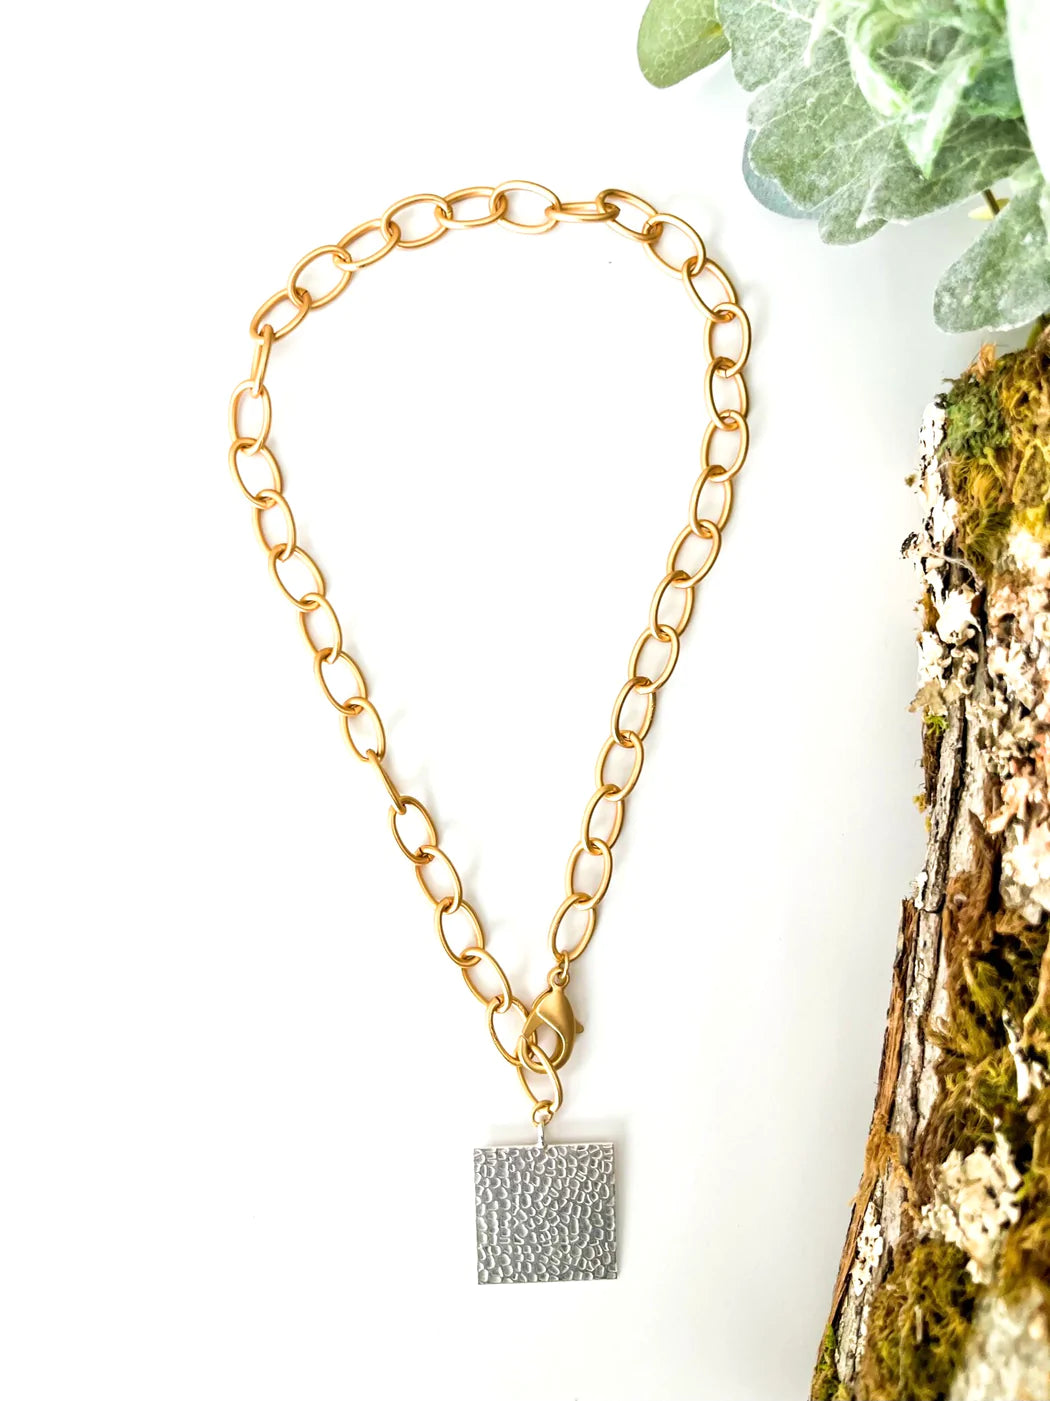 Inspire Designs Town Square Necklace